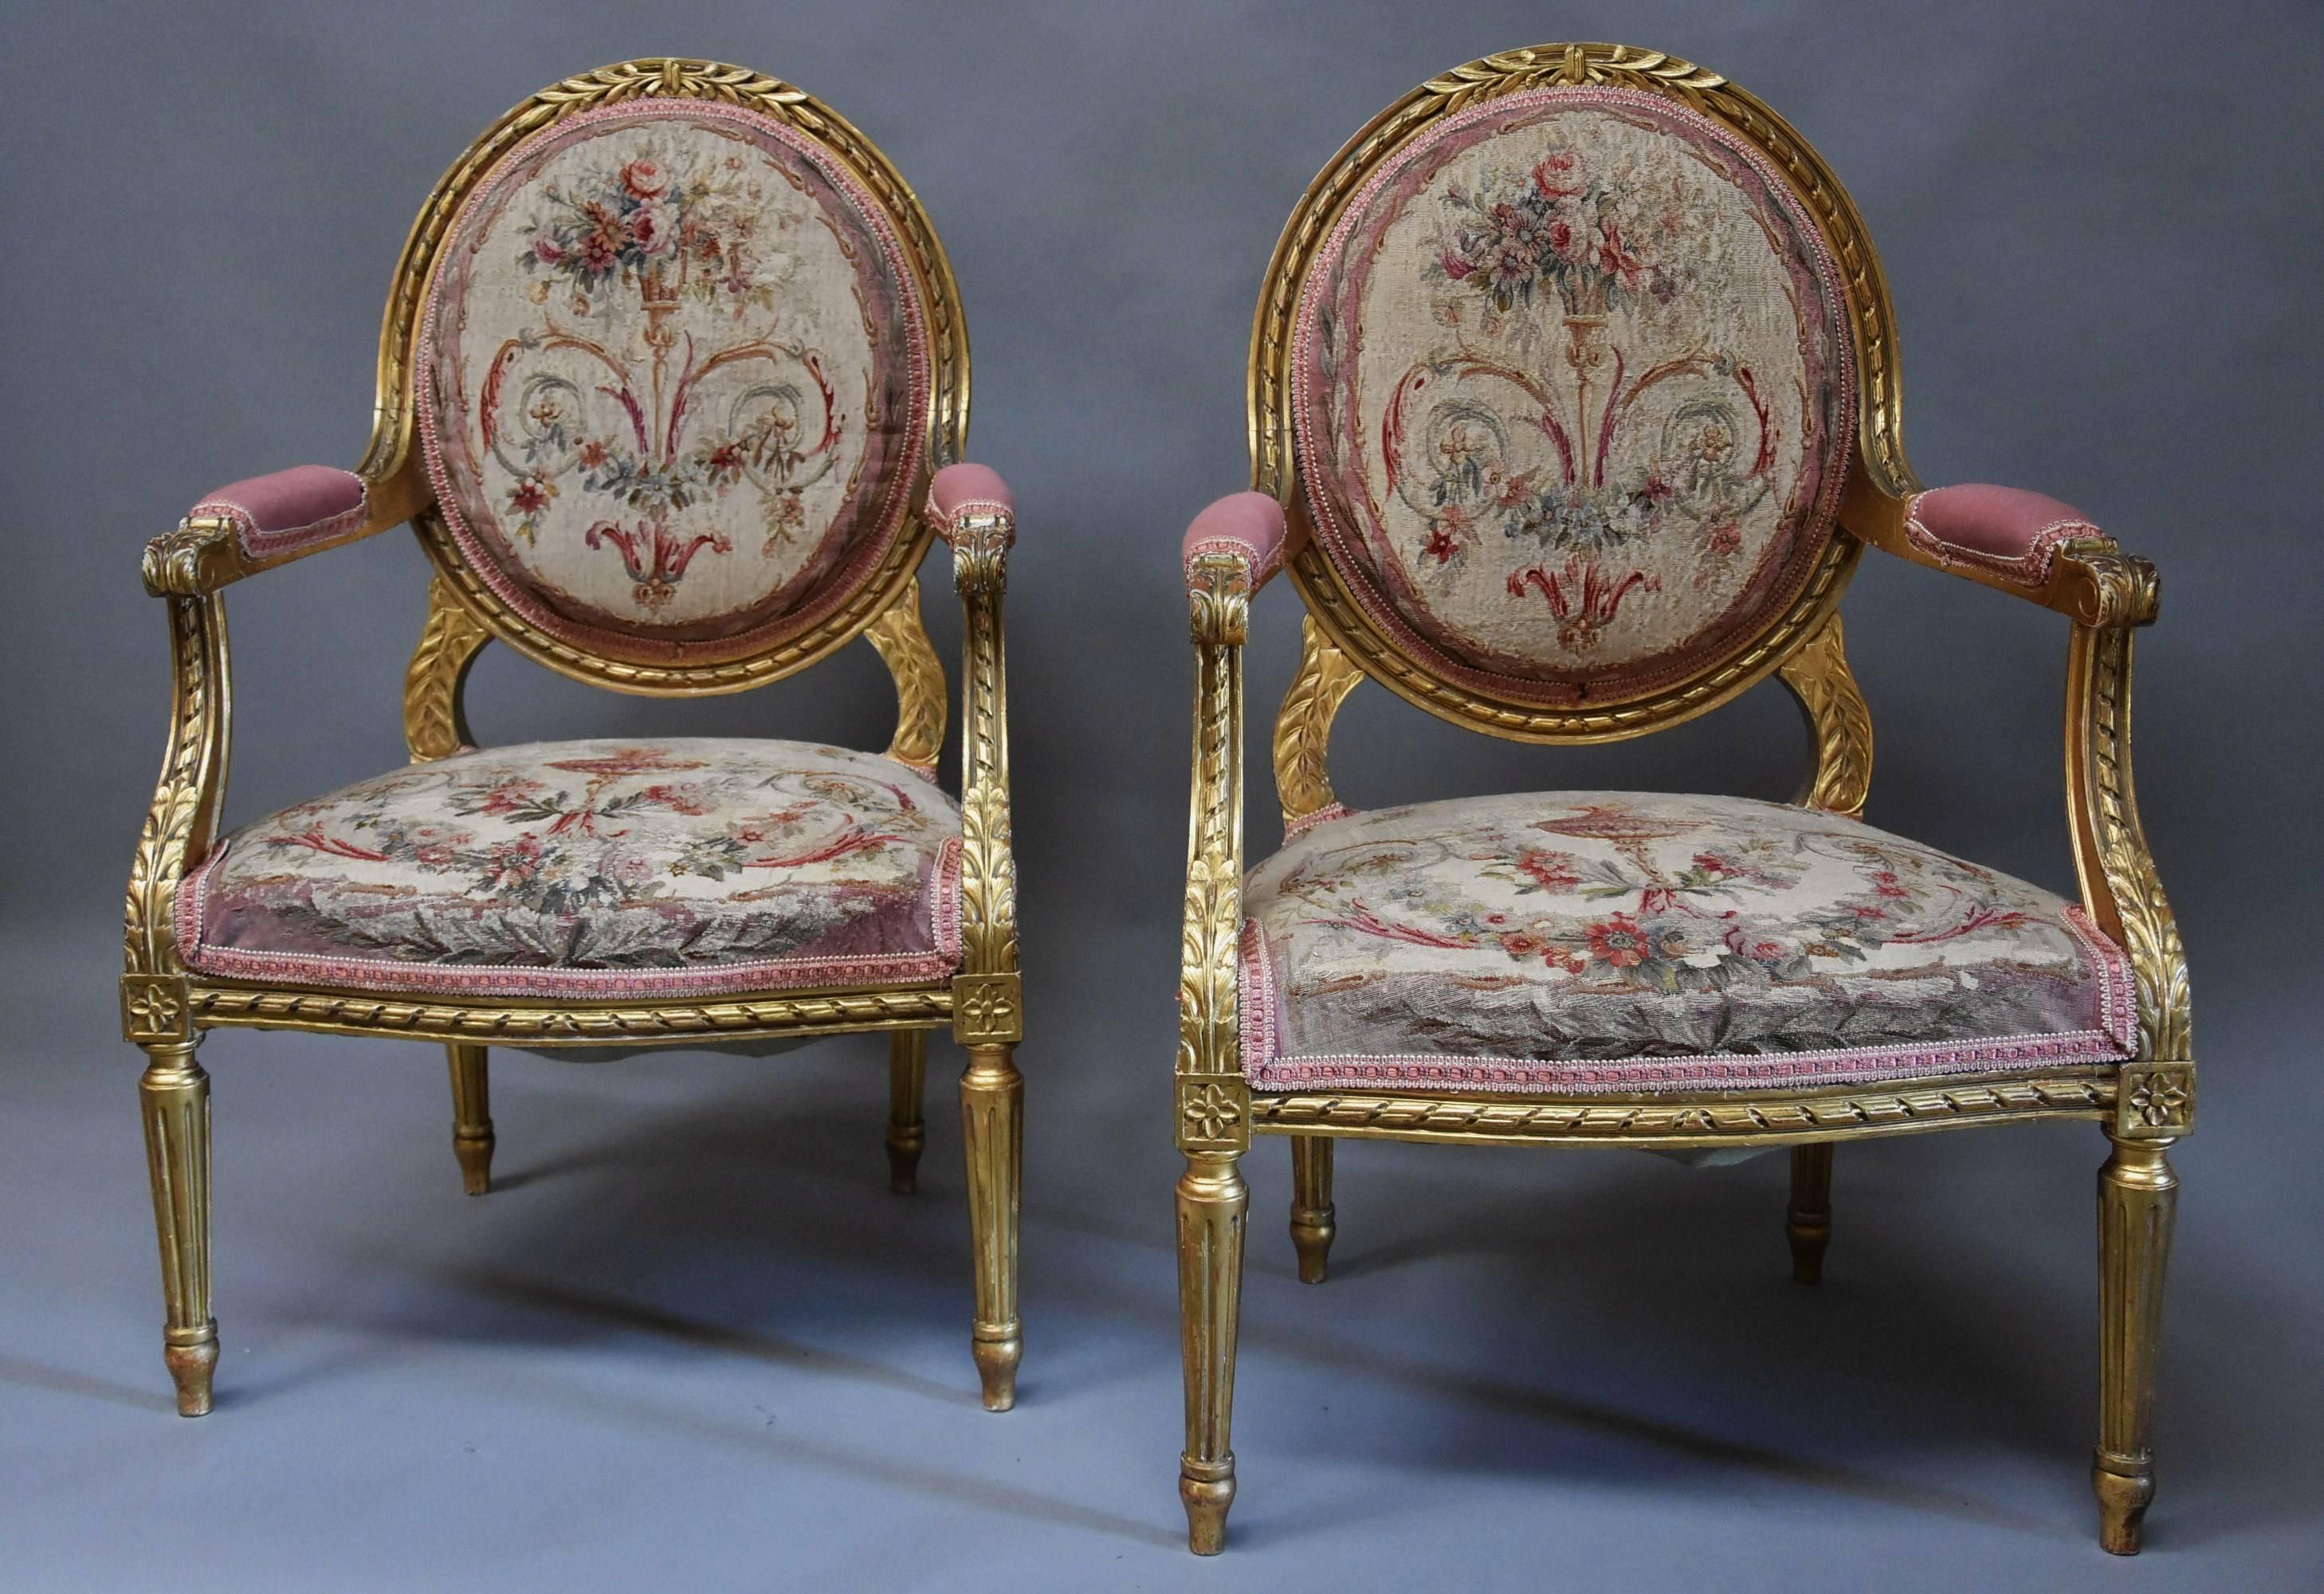 A pair of French late 19th century giltwood open armchairs (or fauteuils) in the Louis XVI style with original Aubusson tapestry covers in pastel tones. 

This pair of armchairs consist of carved oval giltwood backs with foliate decoration to the